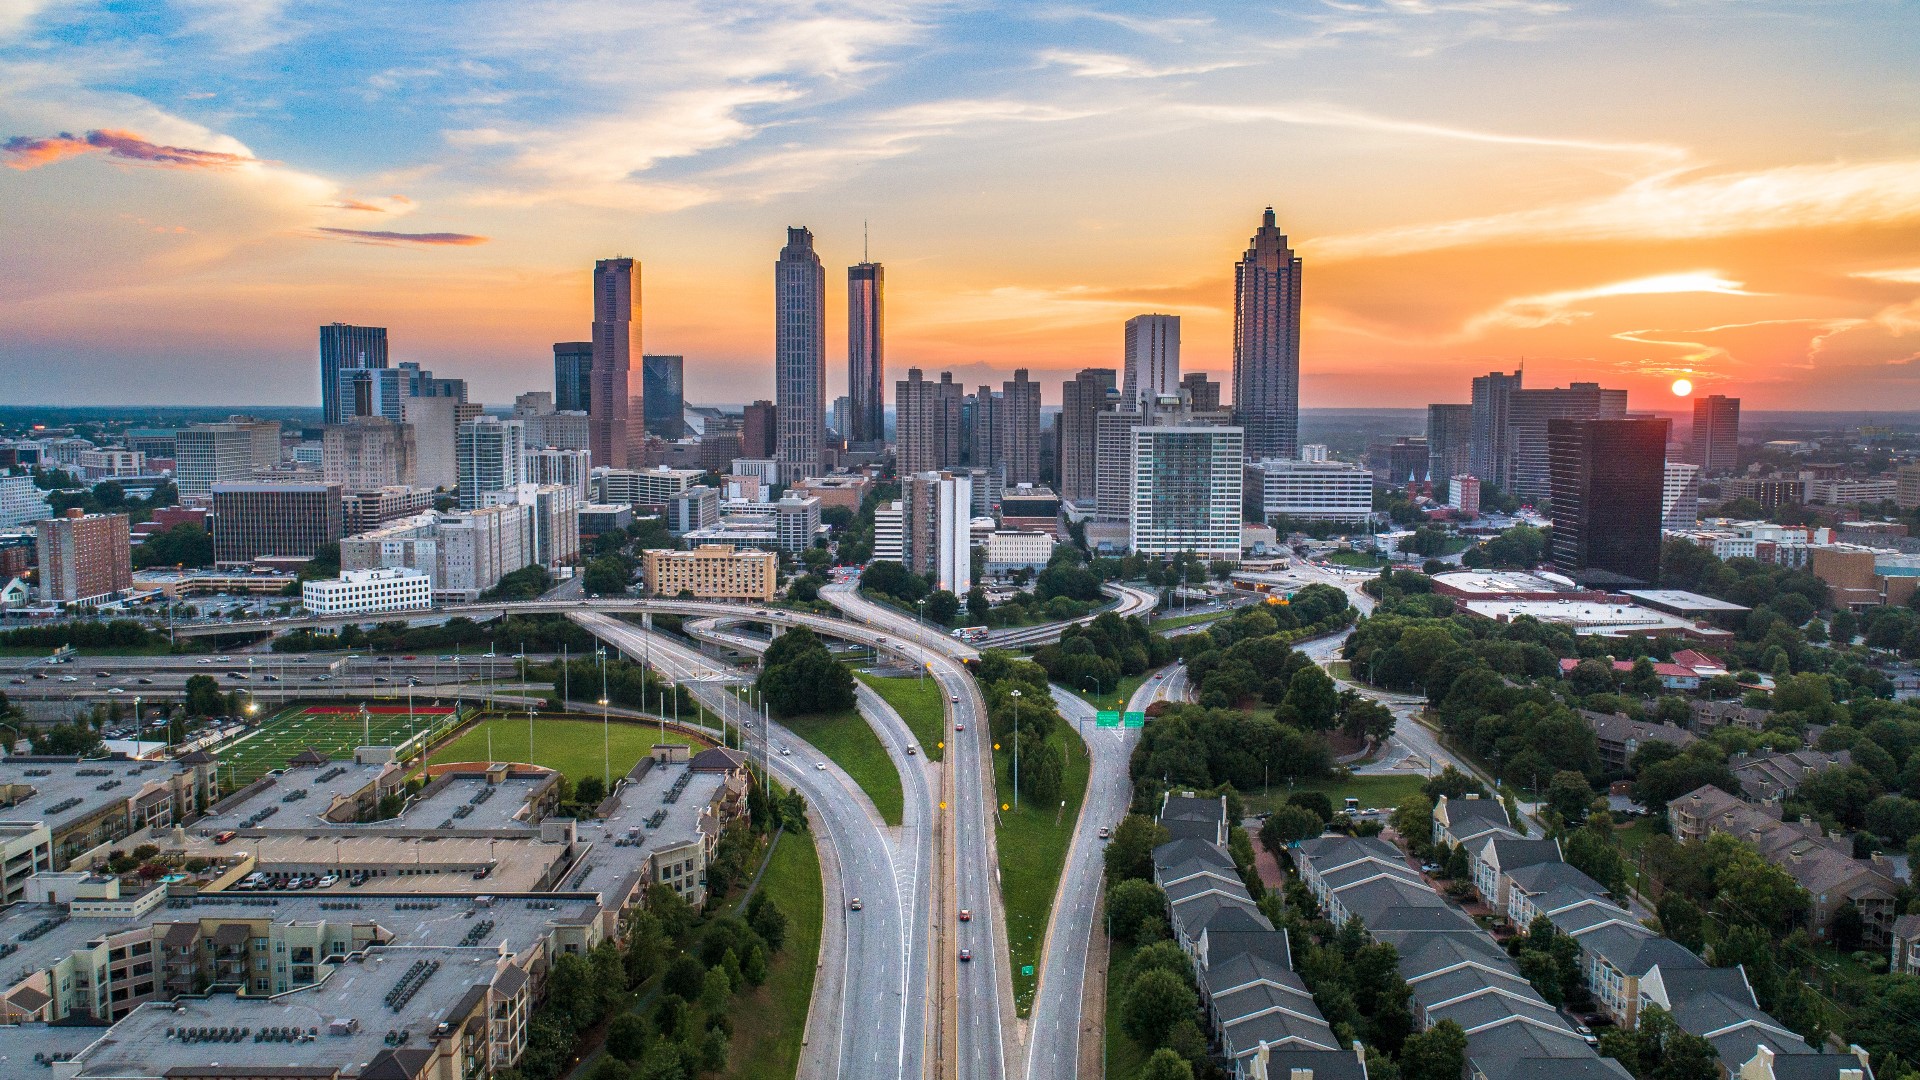 11Alive's Jennifer Bellamy talks with NBC's Chuck Todd about Atlanta's chances to host the 2024 Democratic National Convention, among other topics.